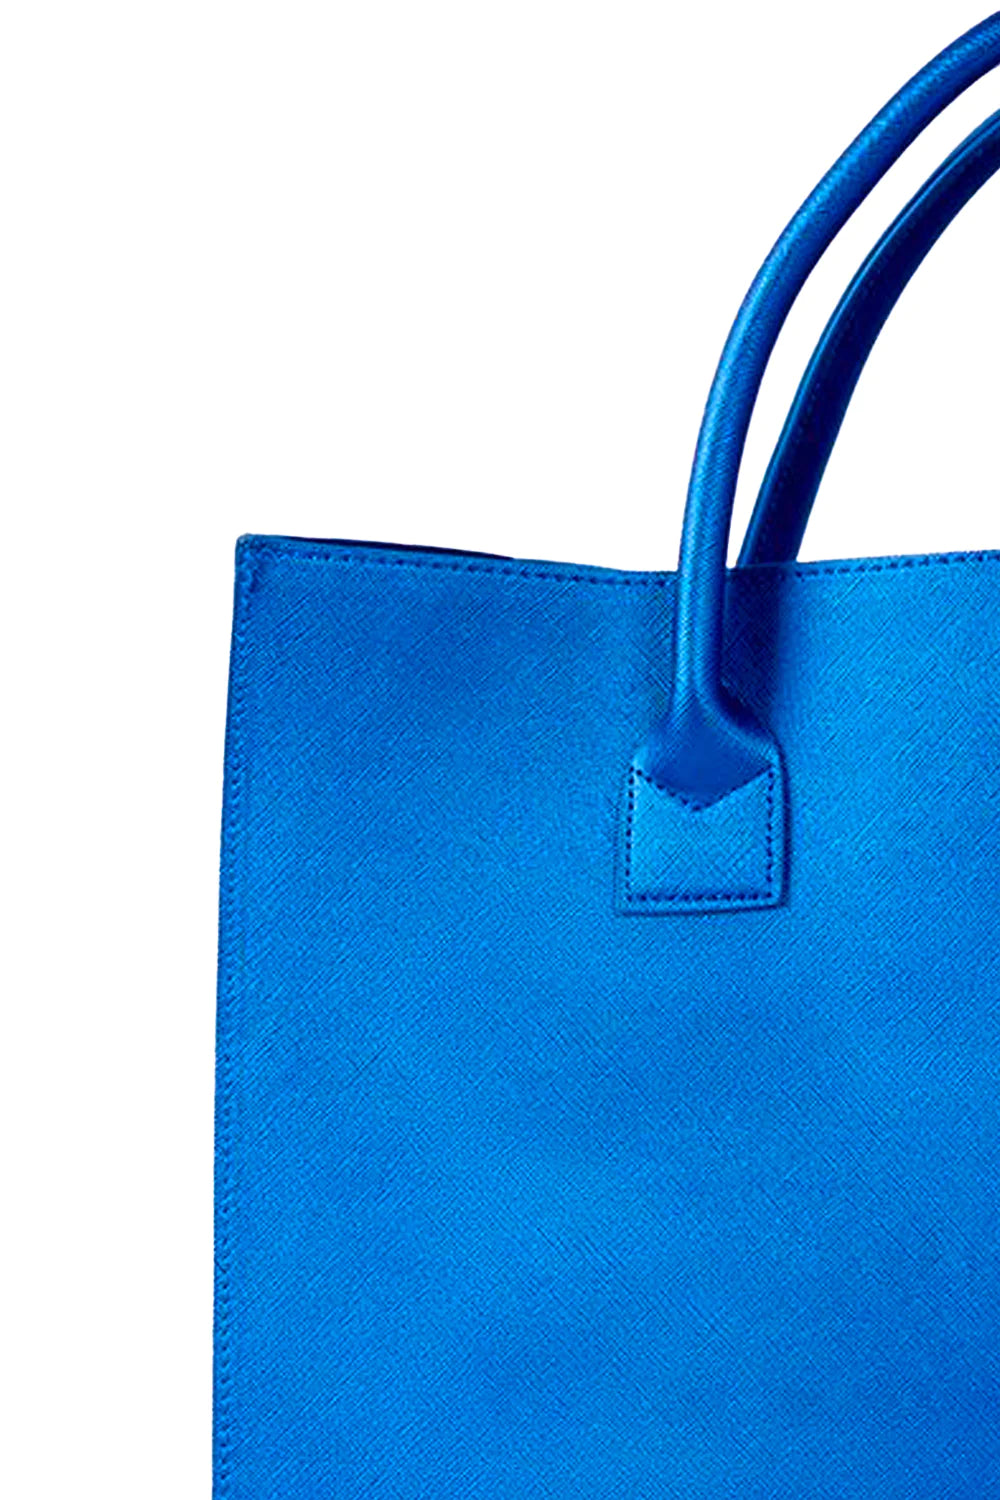 Babe All Over Tote Bag (Electric Blue)